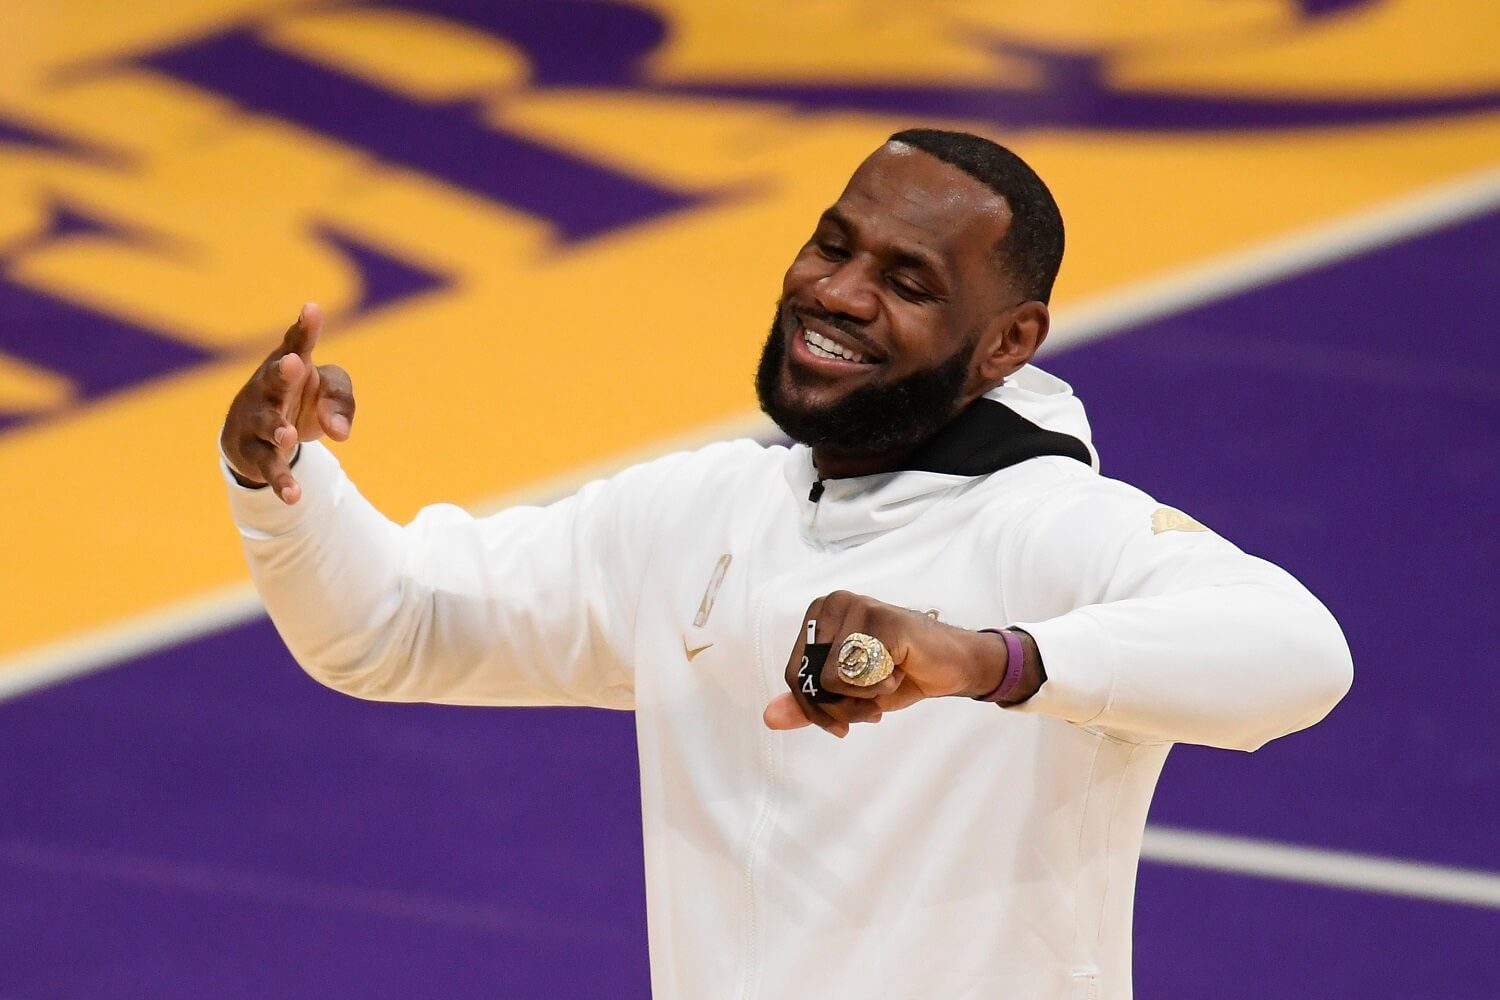 LOS ANGELES, CALIFORNIA - DECEMBER 22: LeBron James #23 of the Los Angeles Lakers reacts after receiving his 2020 NBA championship ring during a ceremony before the opening night game against the Los Angeles Clippers at Staples Center on December 22, 2020 in Los Angeles, California.